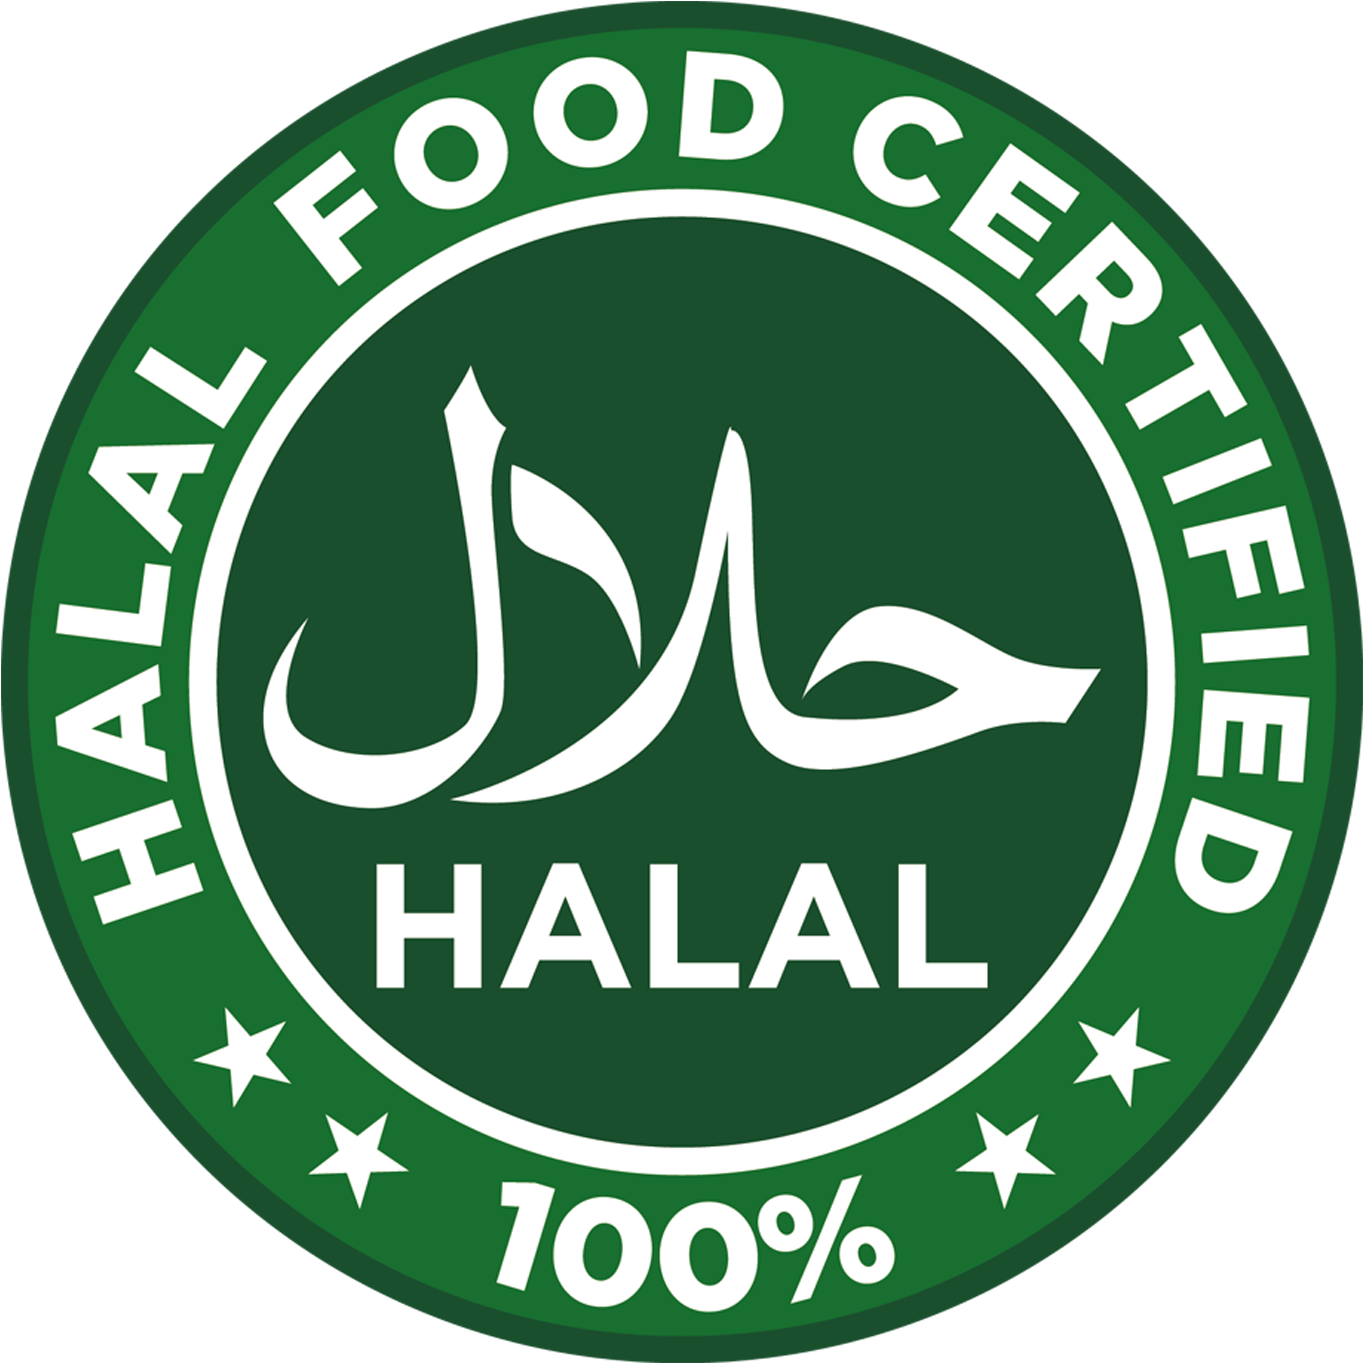 Adding This Field - Halal Logo - (1643x1643) Png Clipart Download